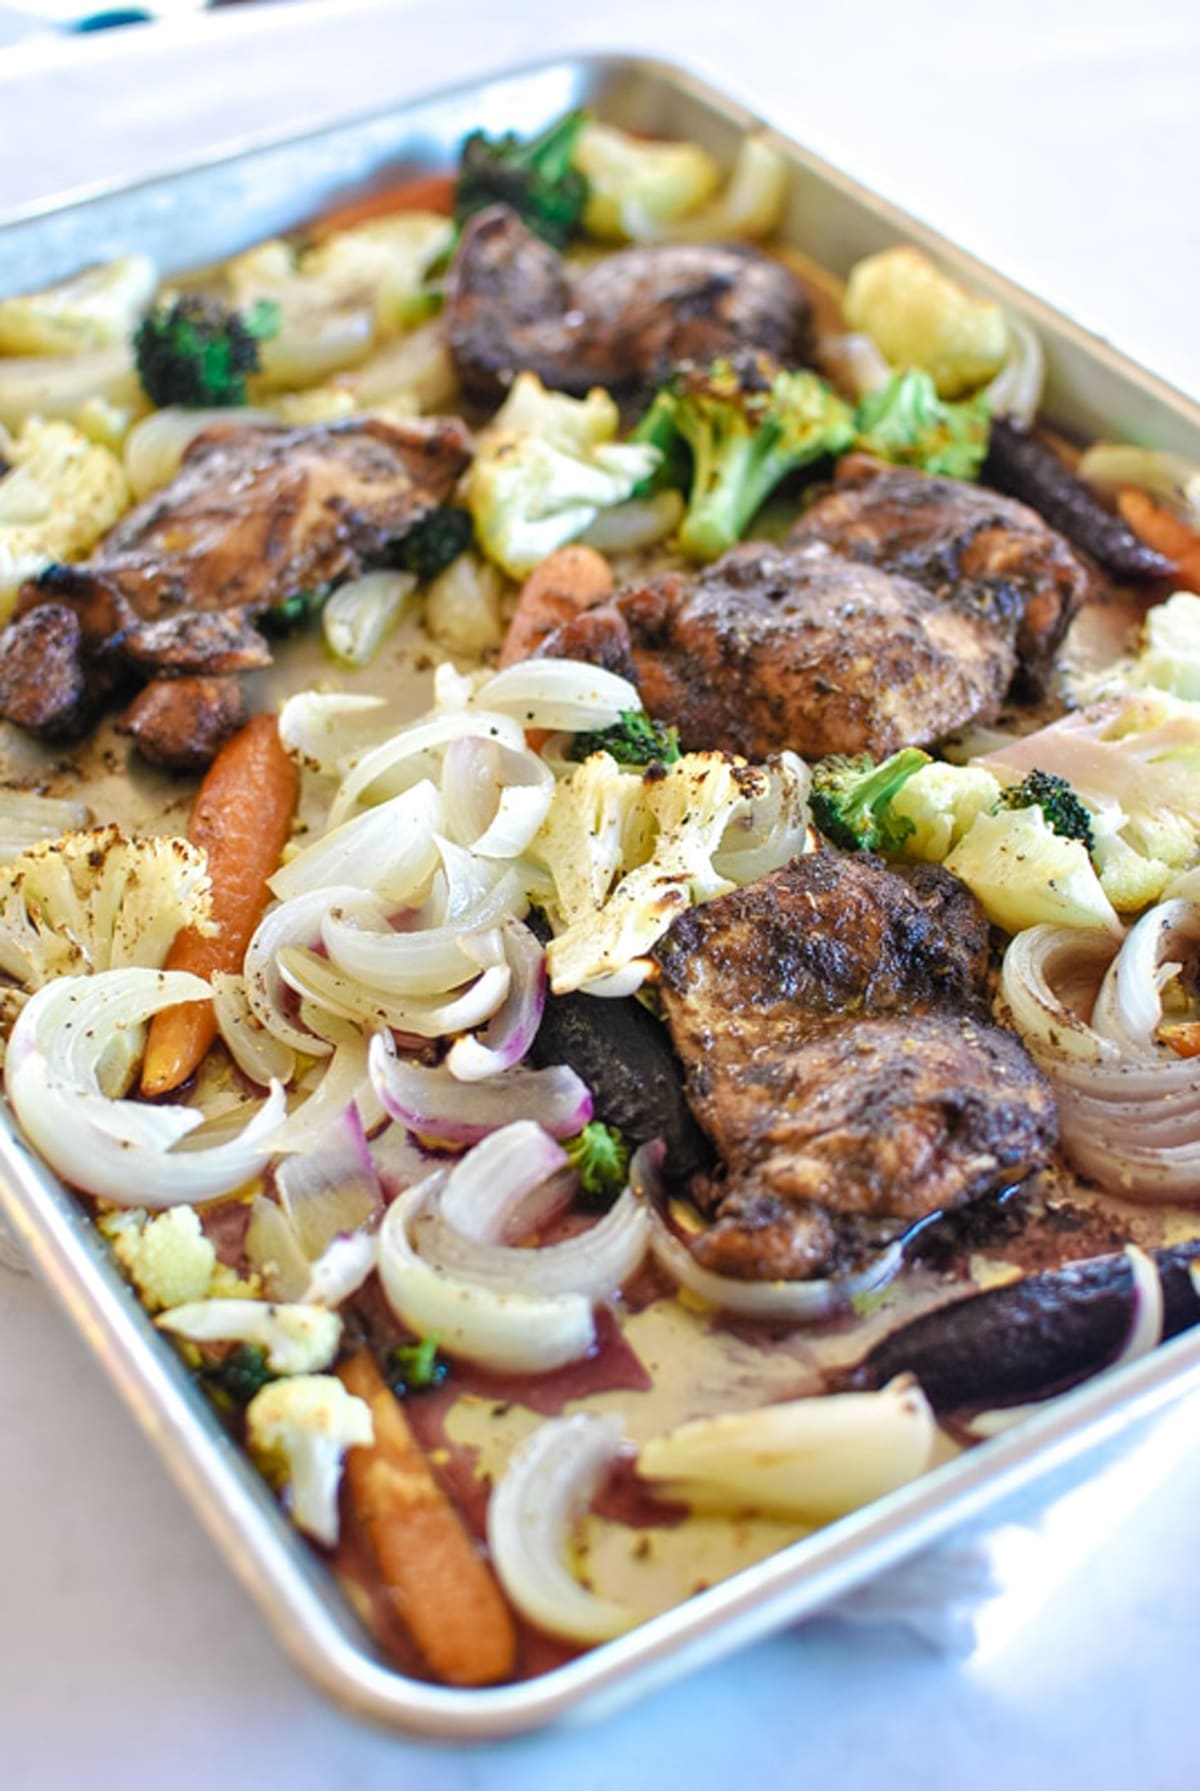 Baked chicken thighs recipe with vegetables for a sheet pan dinner.